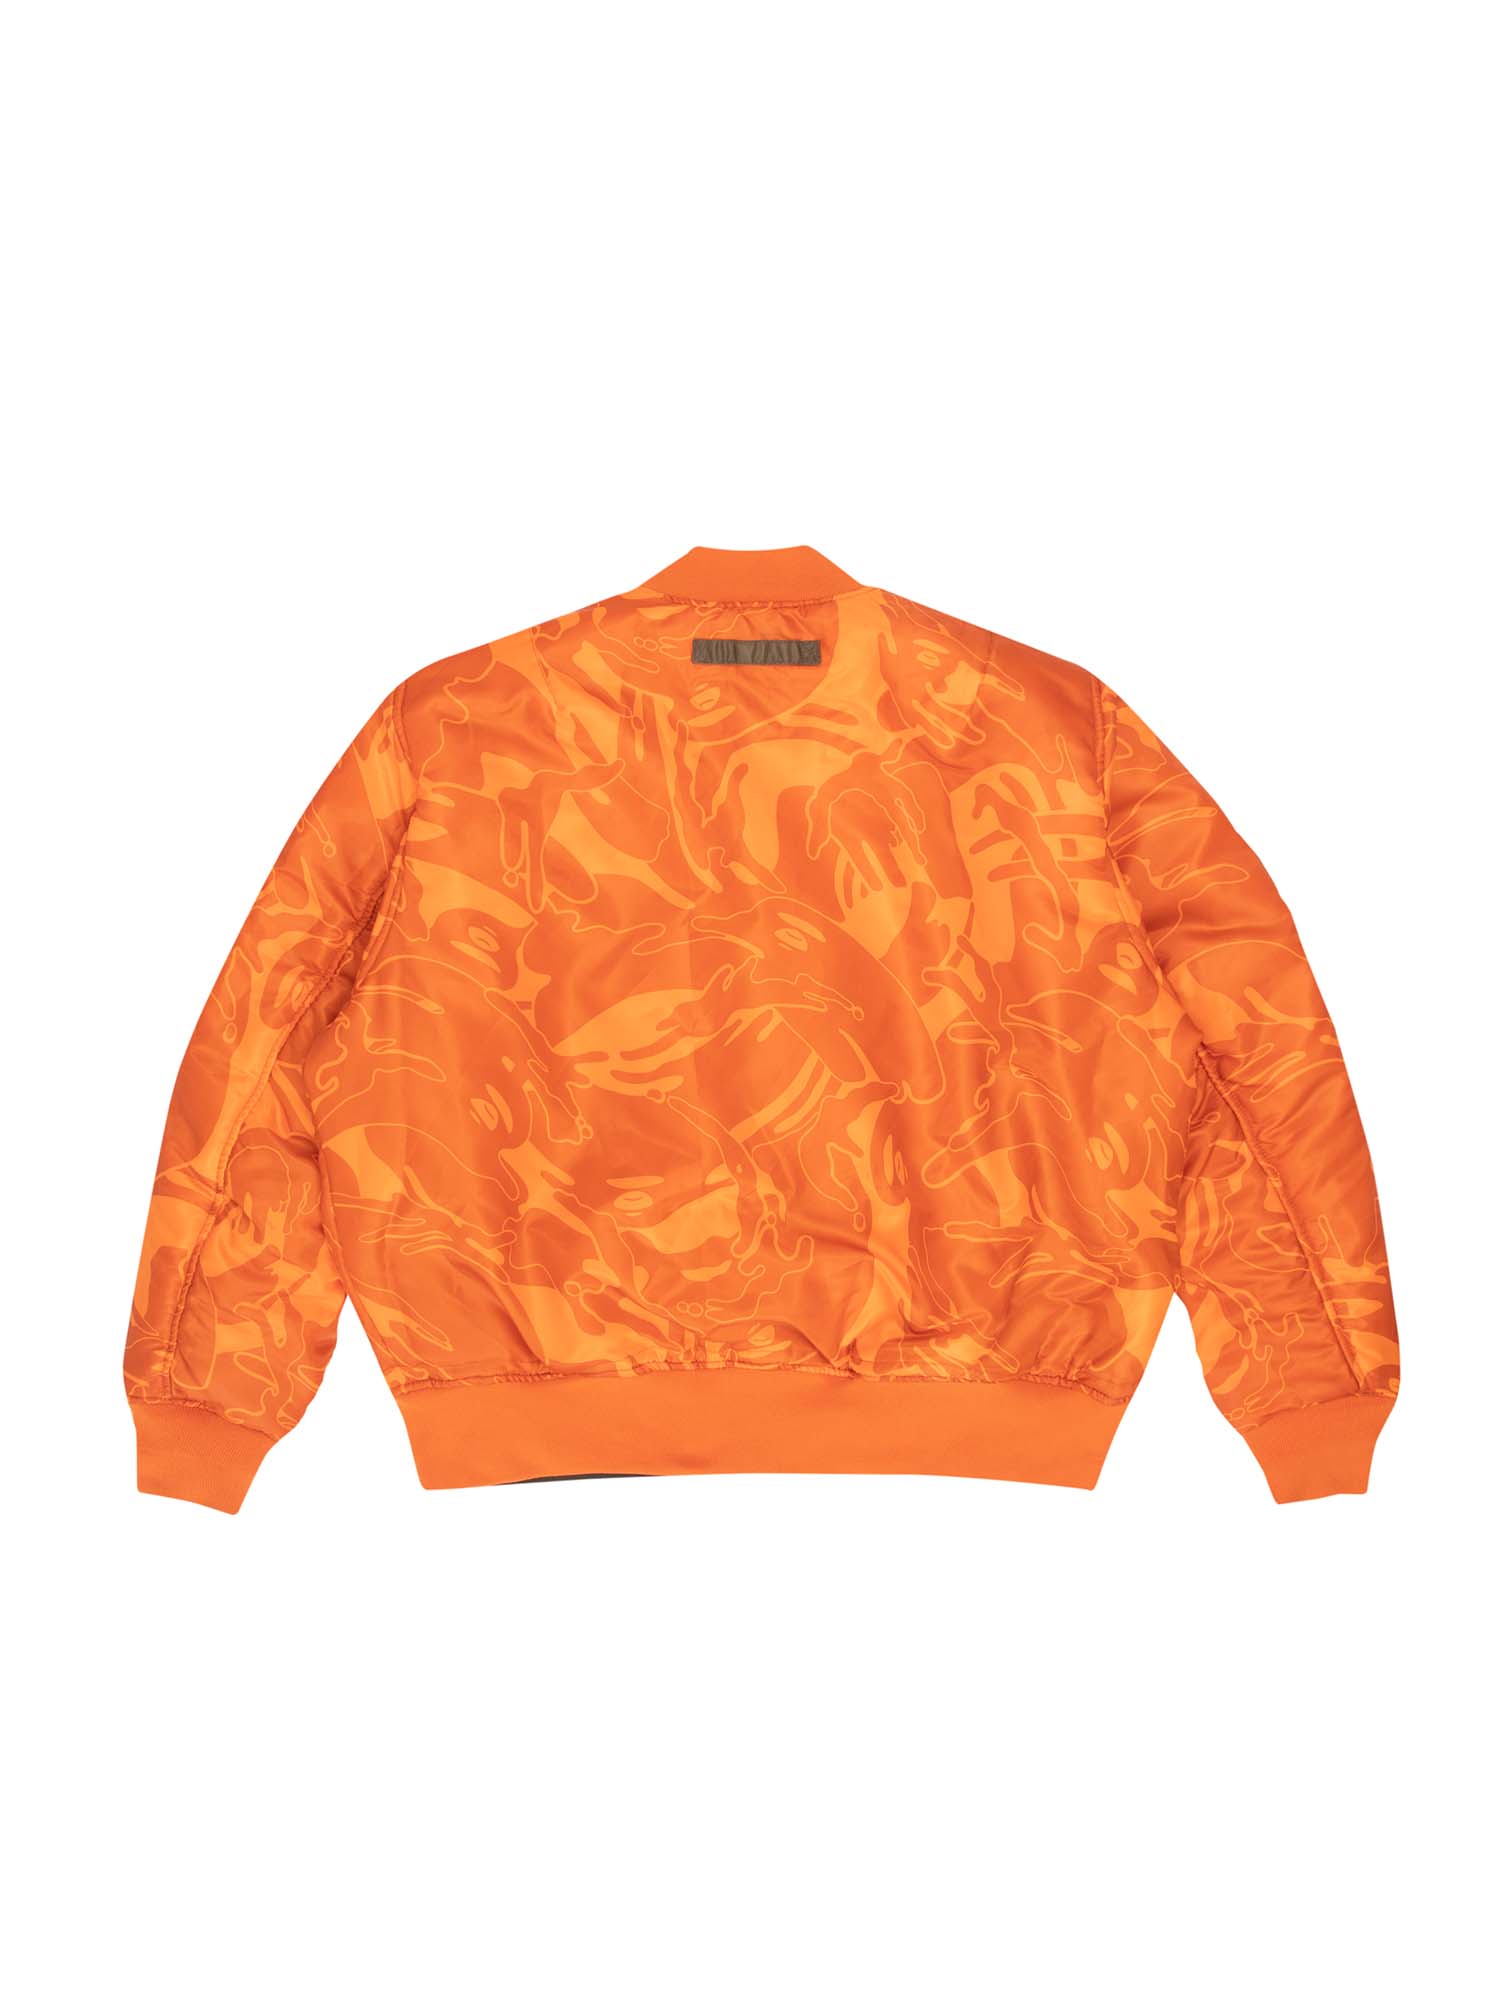 AAPE X ALPHA REVERSIBLE MA-1 QUILTED JACKET OUTERWEAR Alpha Industries, Inc. 